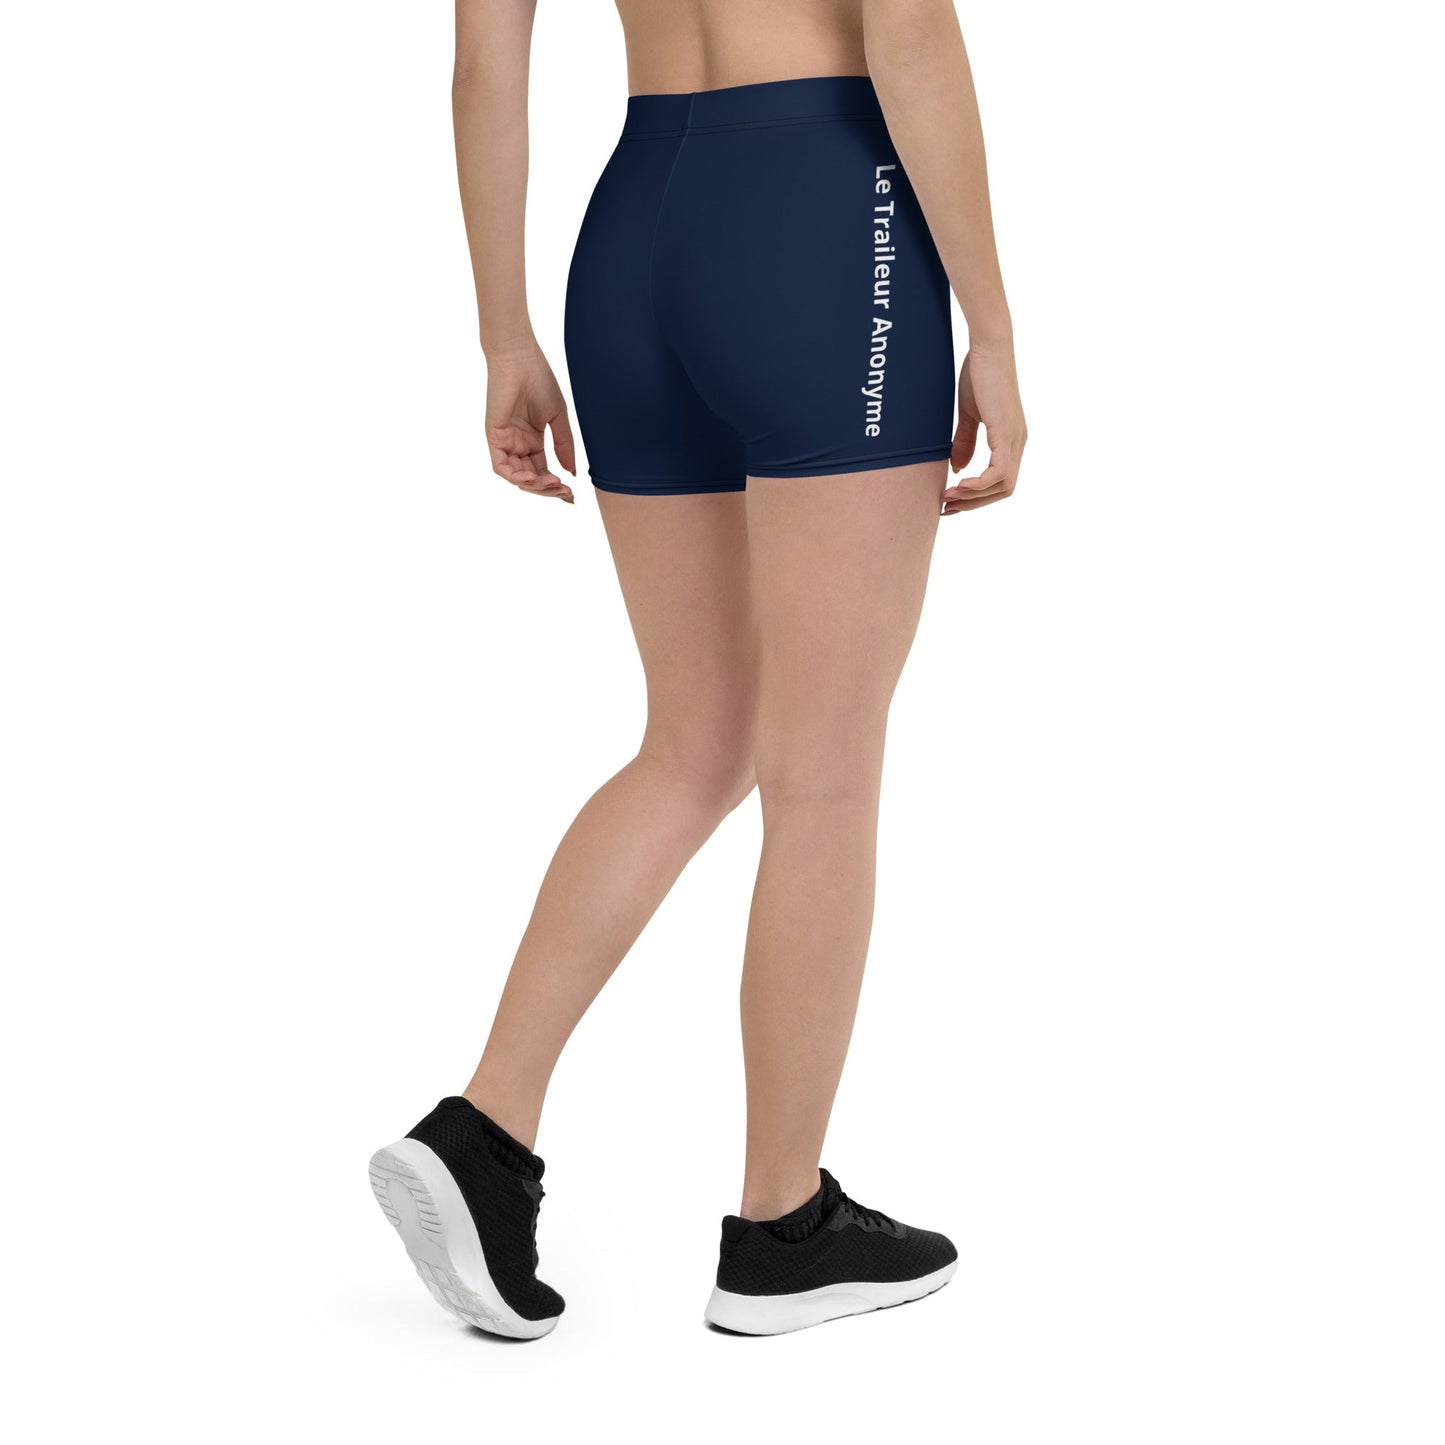 Shorty Femme - Anonymous Runners - Le Traileur Anonyme